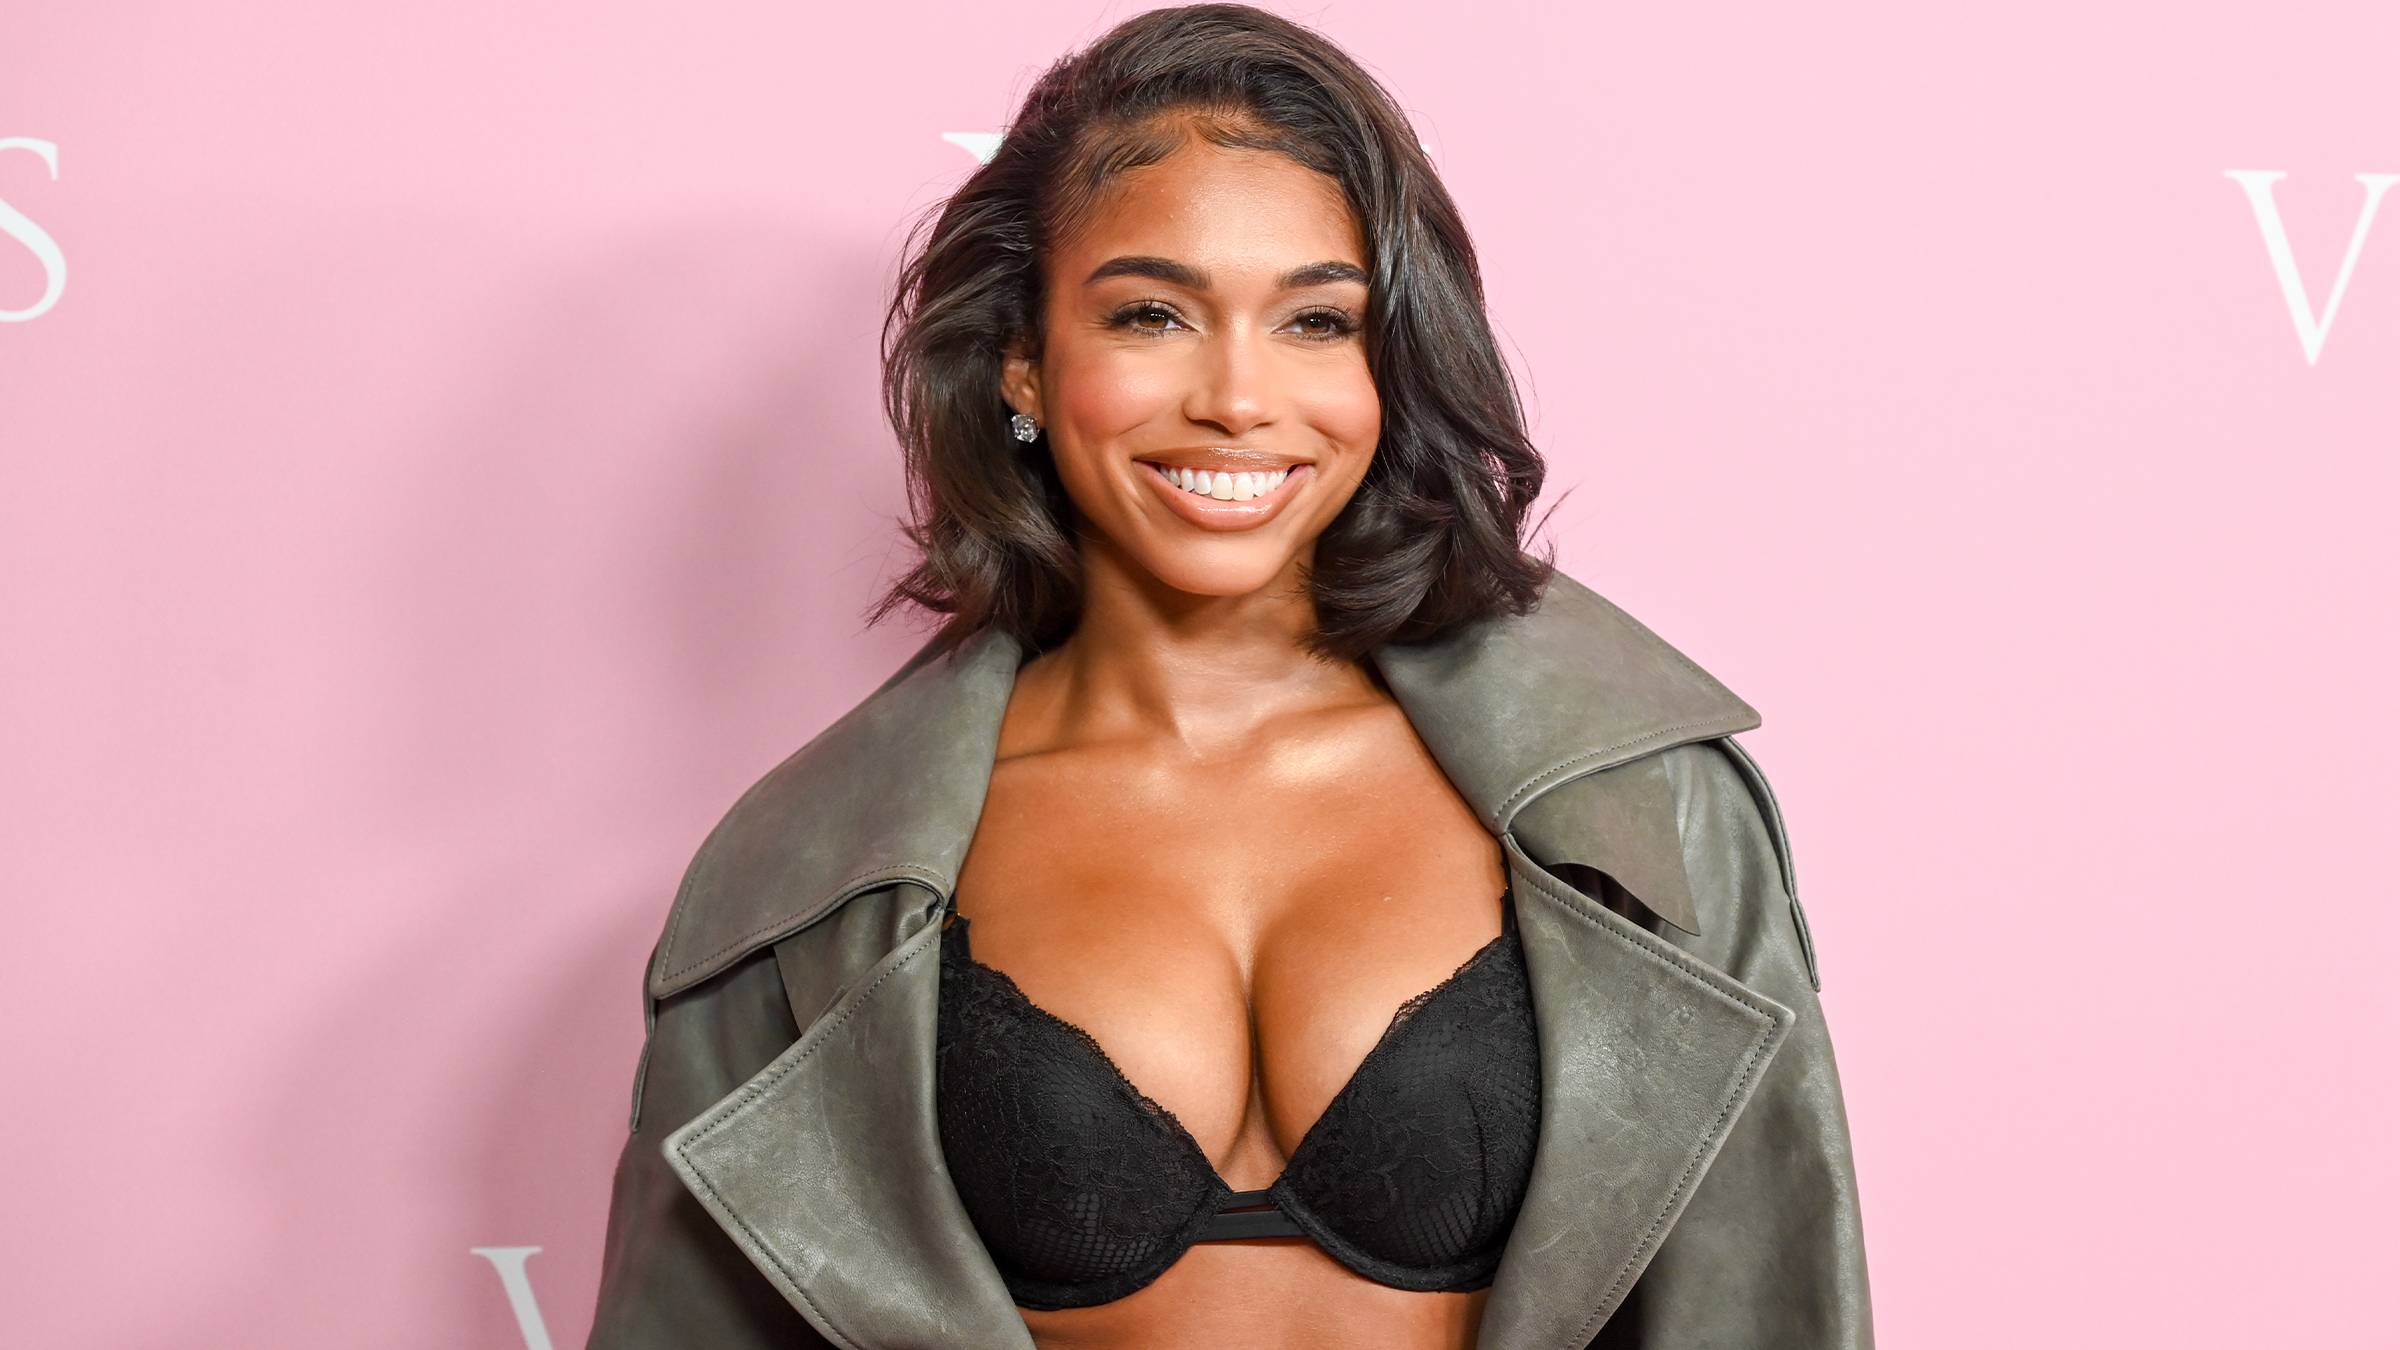 Lori Harvey, 26, flaunts her jaw-dropping curves in gray leather